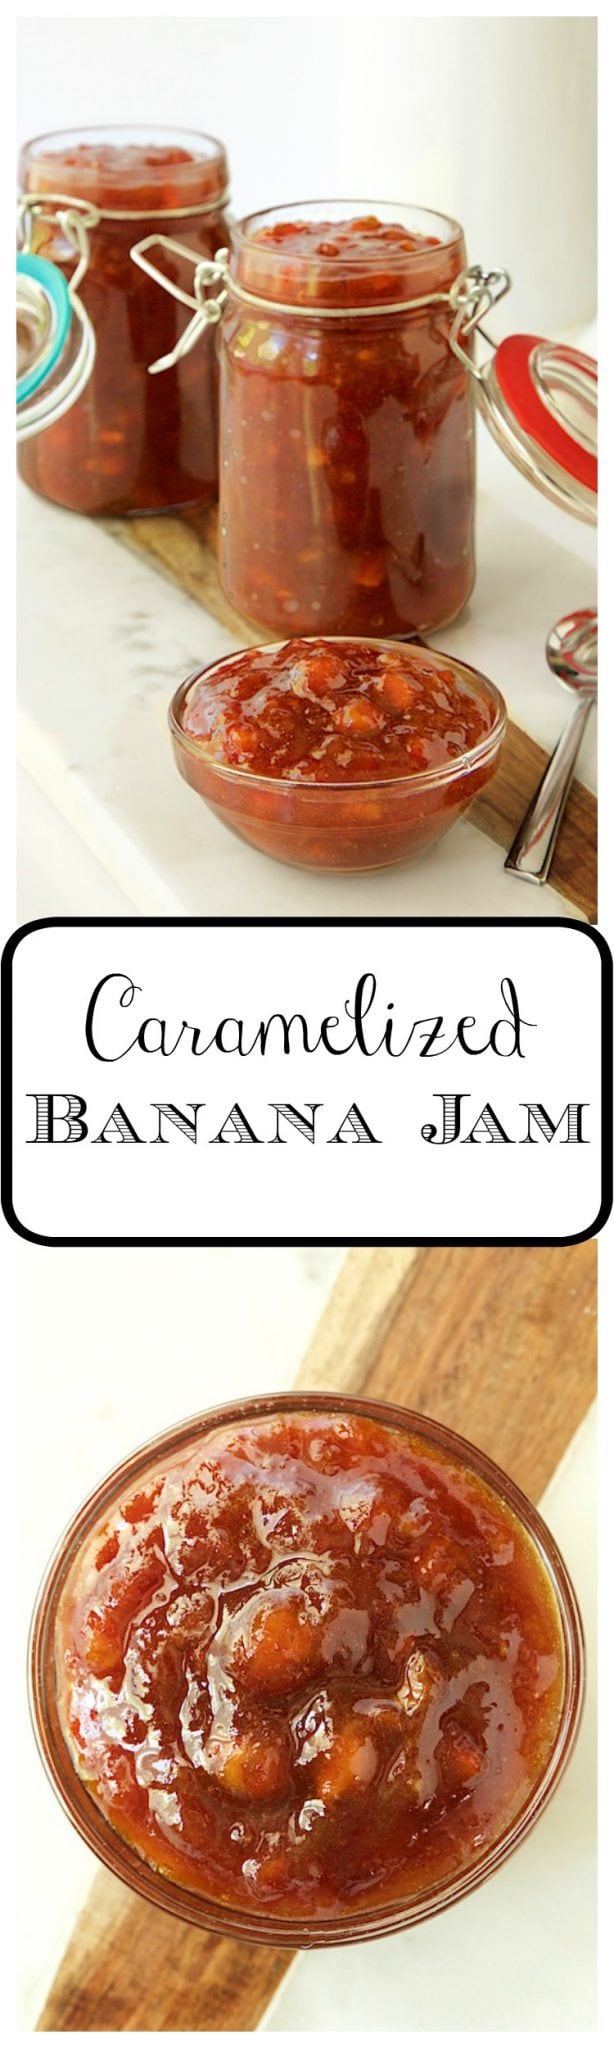 Caramelized Banana Jam - amazingly delicious on yogurt, toast, biscuits, pancakes, ice cream... and another way to use ripe bananas.